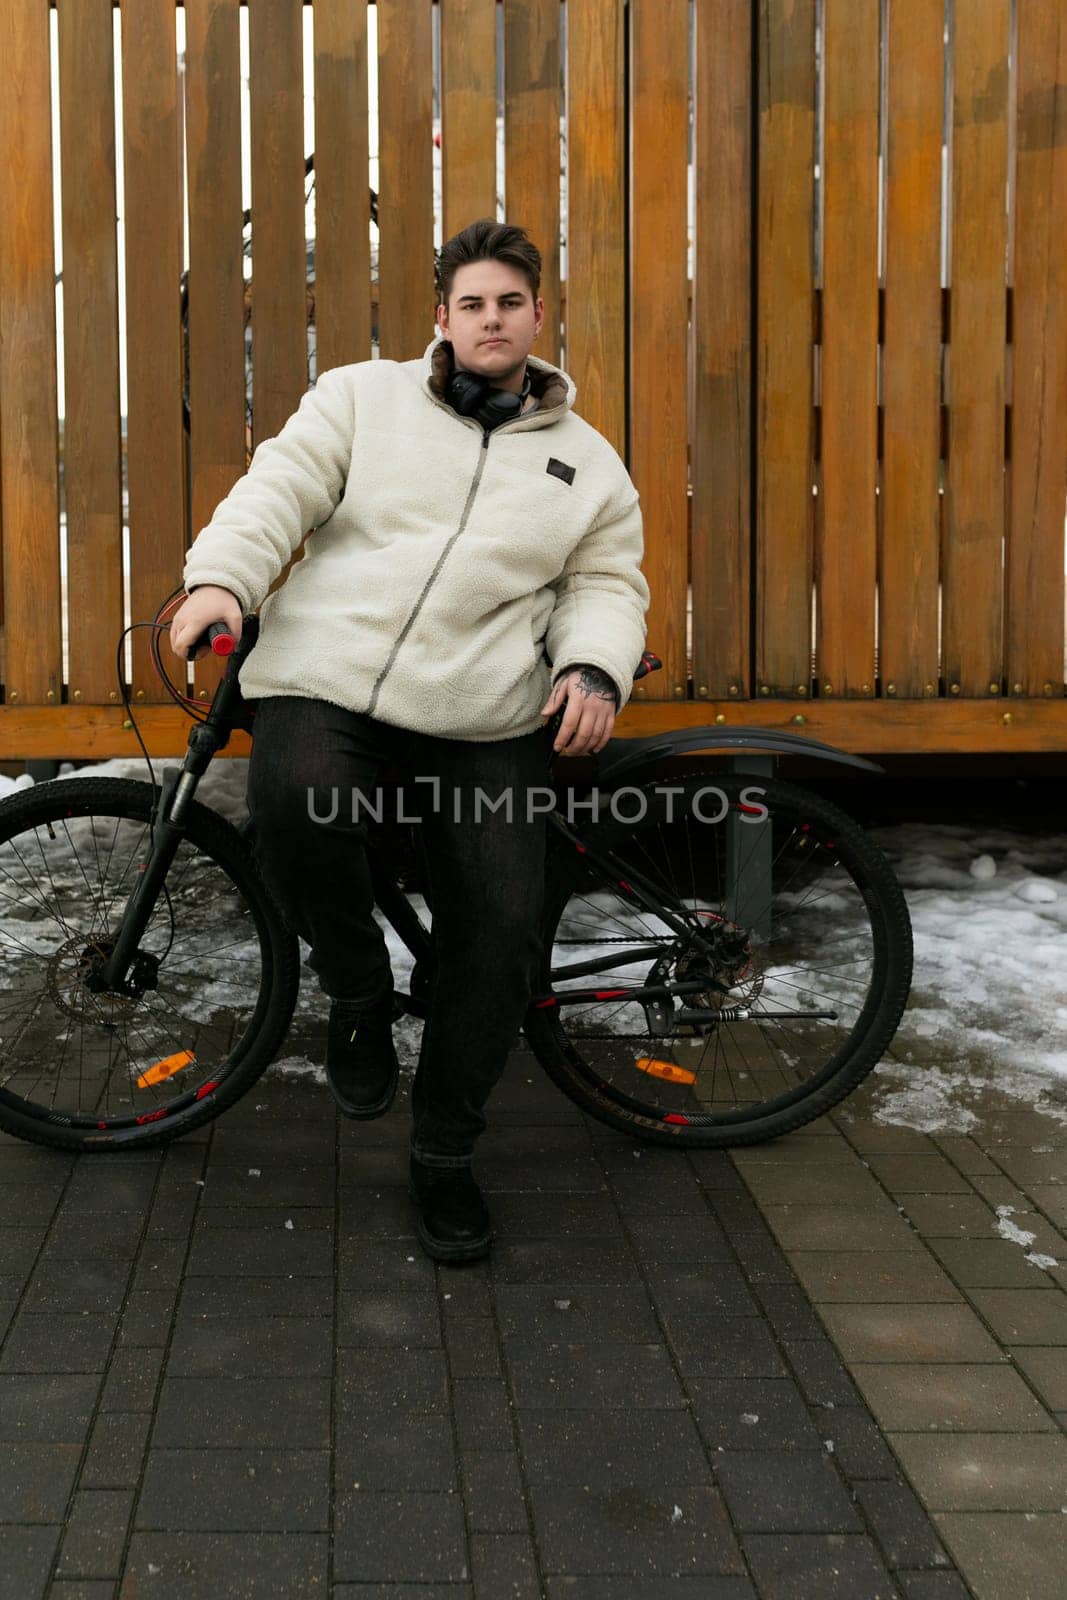 A handsome young guy rides around the city on a bicycle.